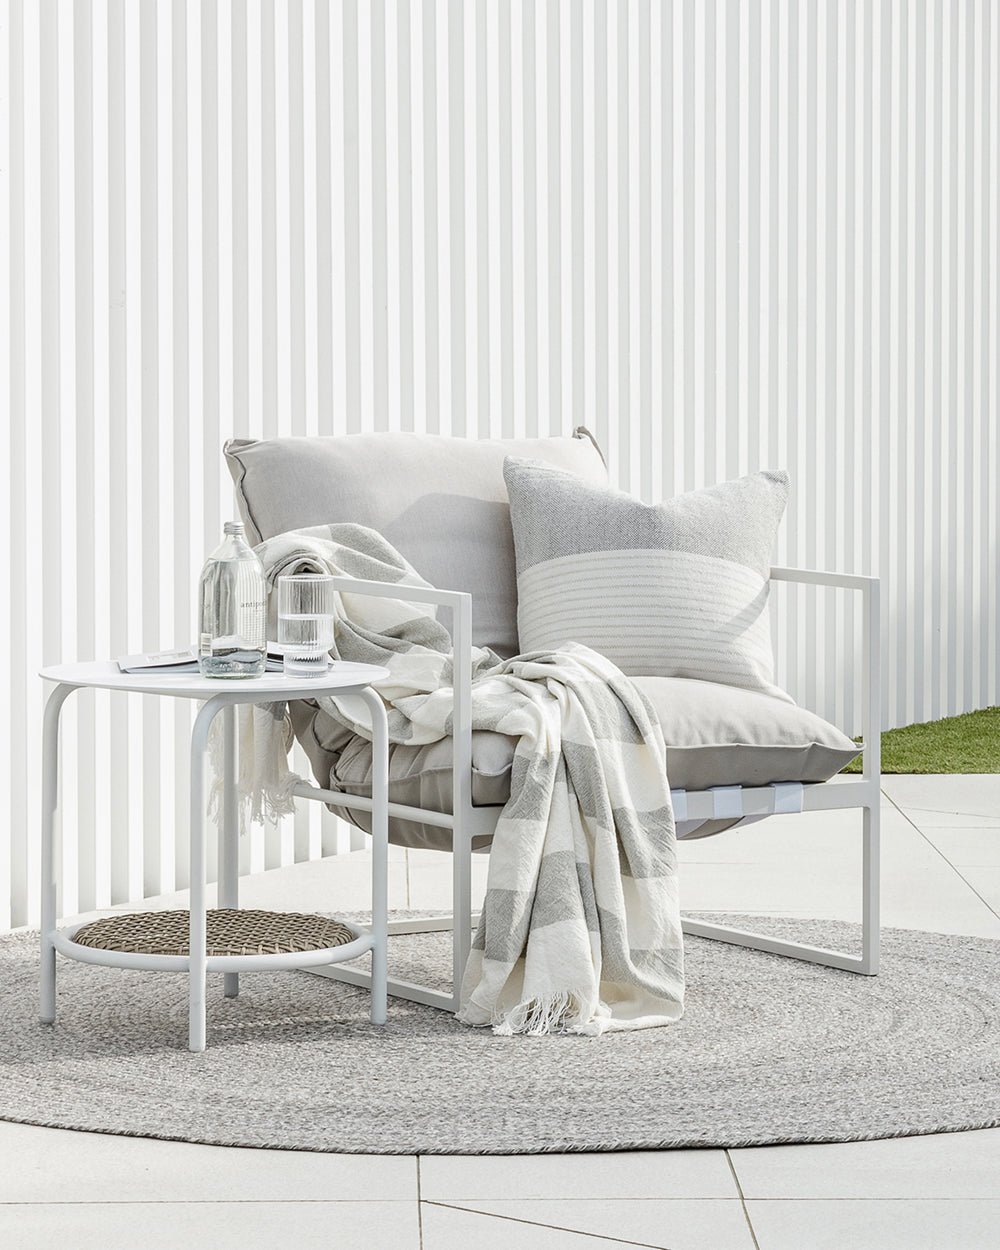 Willett outdoor cushion on patio chair with a grey and cream throw on a round mat next to a side table witih water and glass